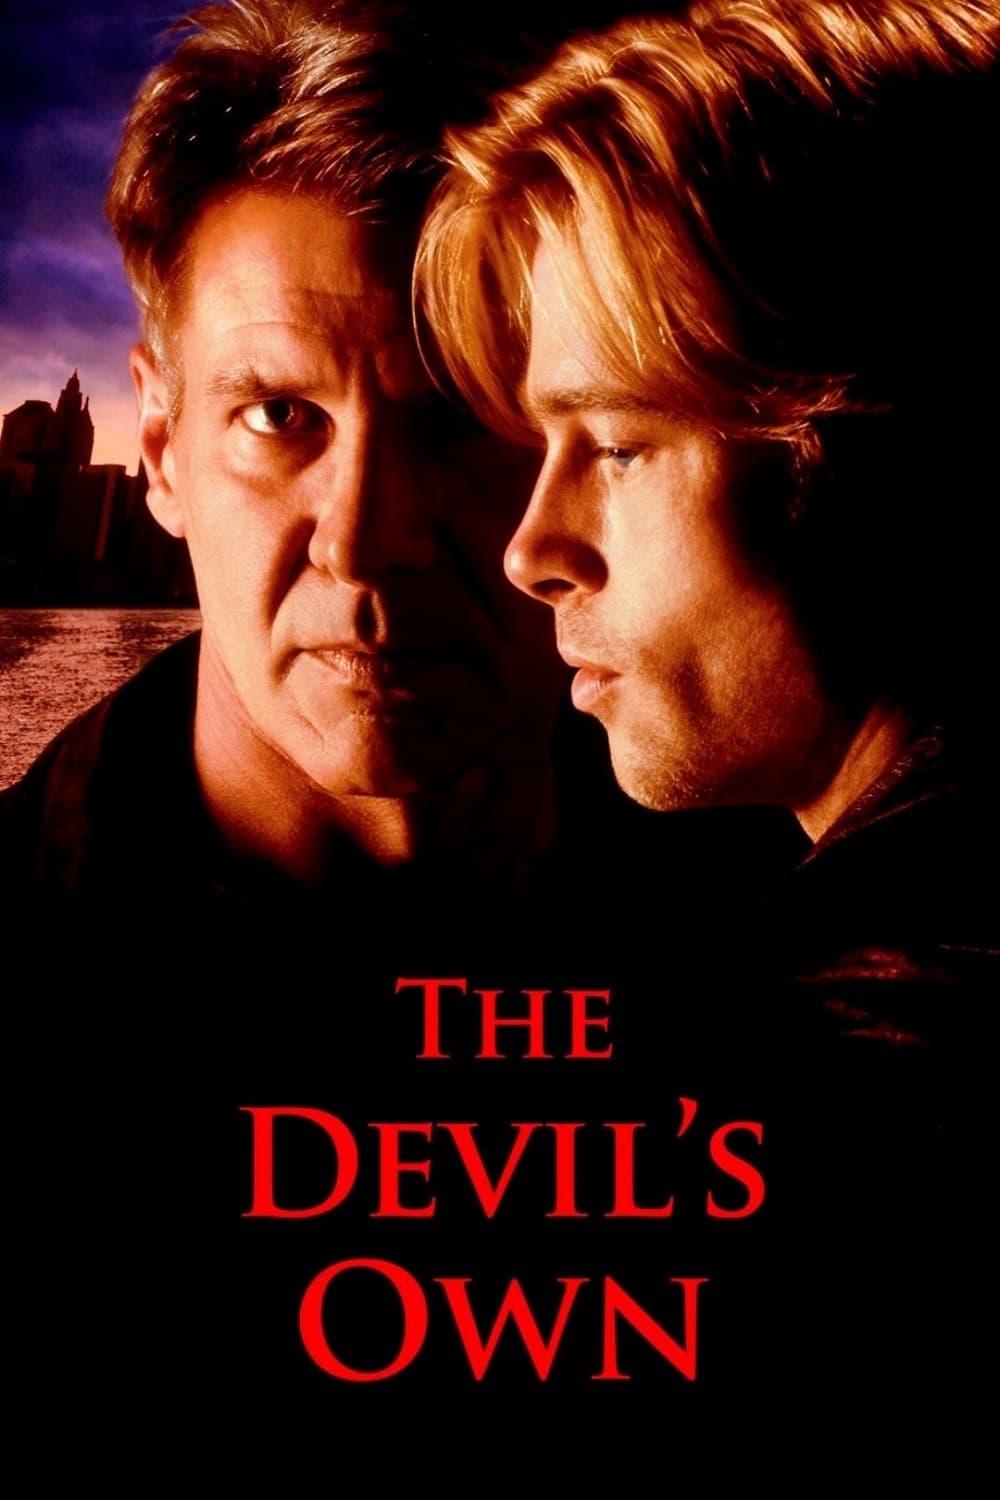 The Devil's Own poster